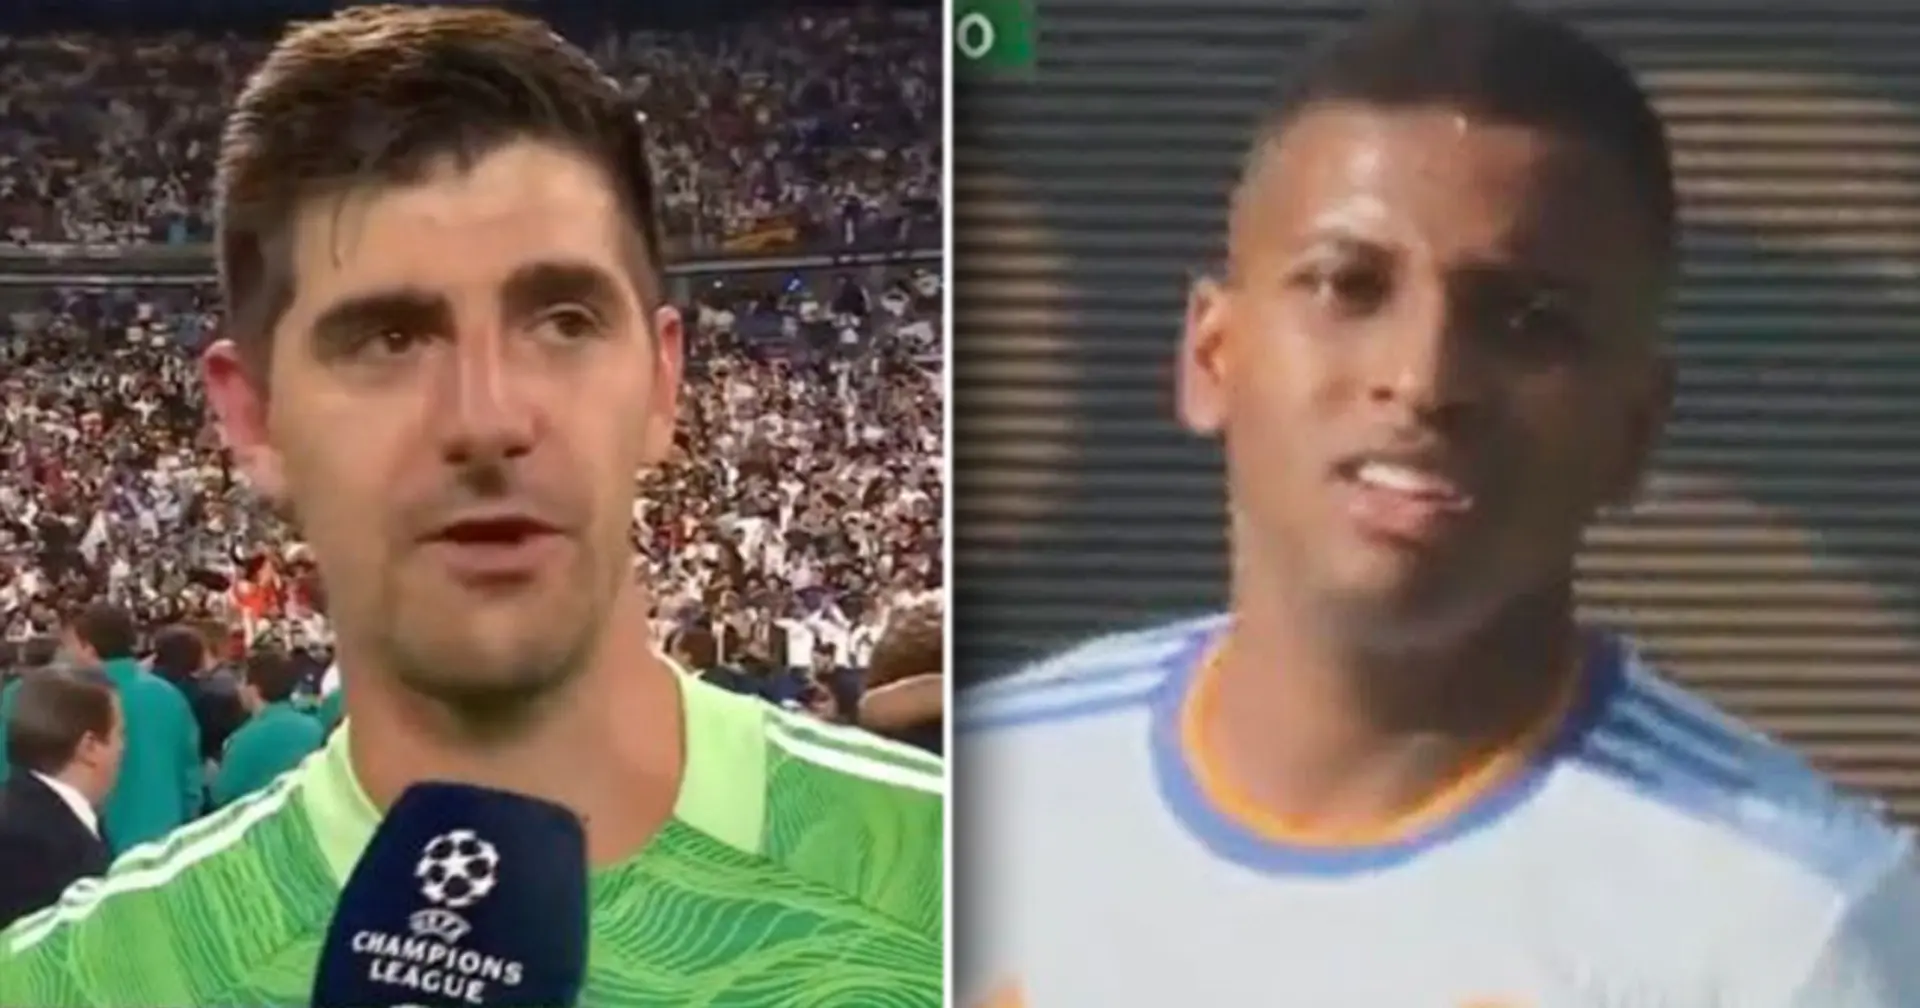 Latest on Courtois, Rodrygo and one more player: Real Madrid's injury updates